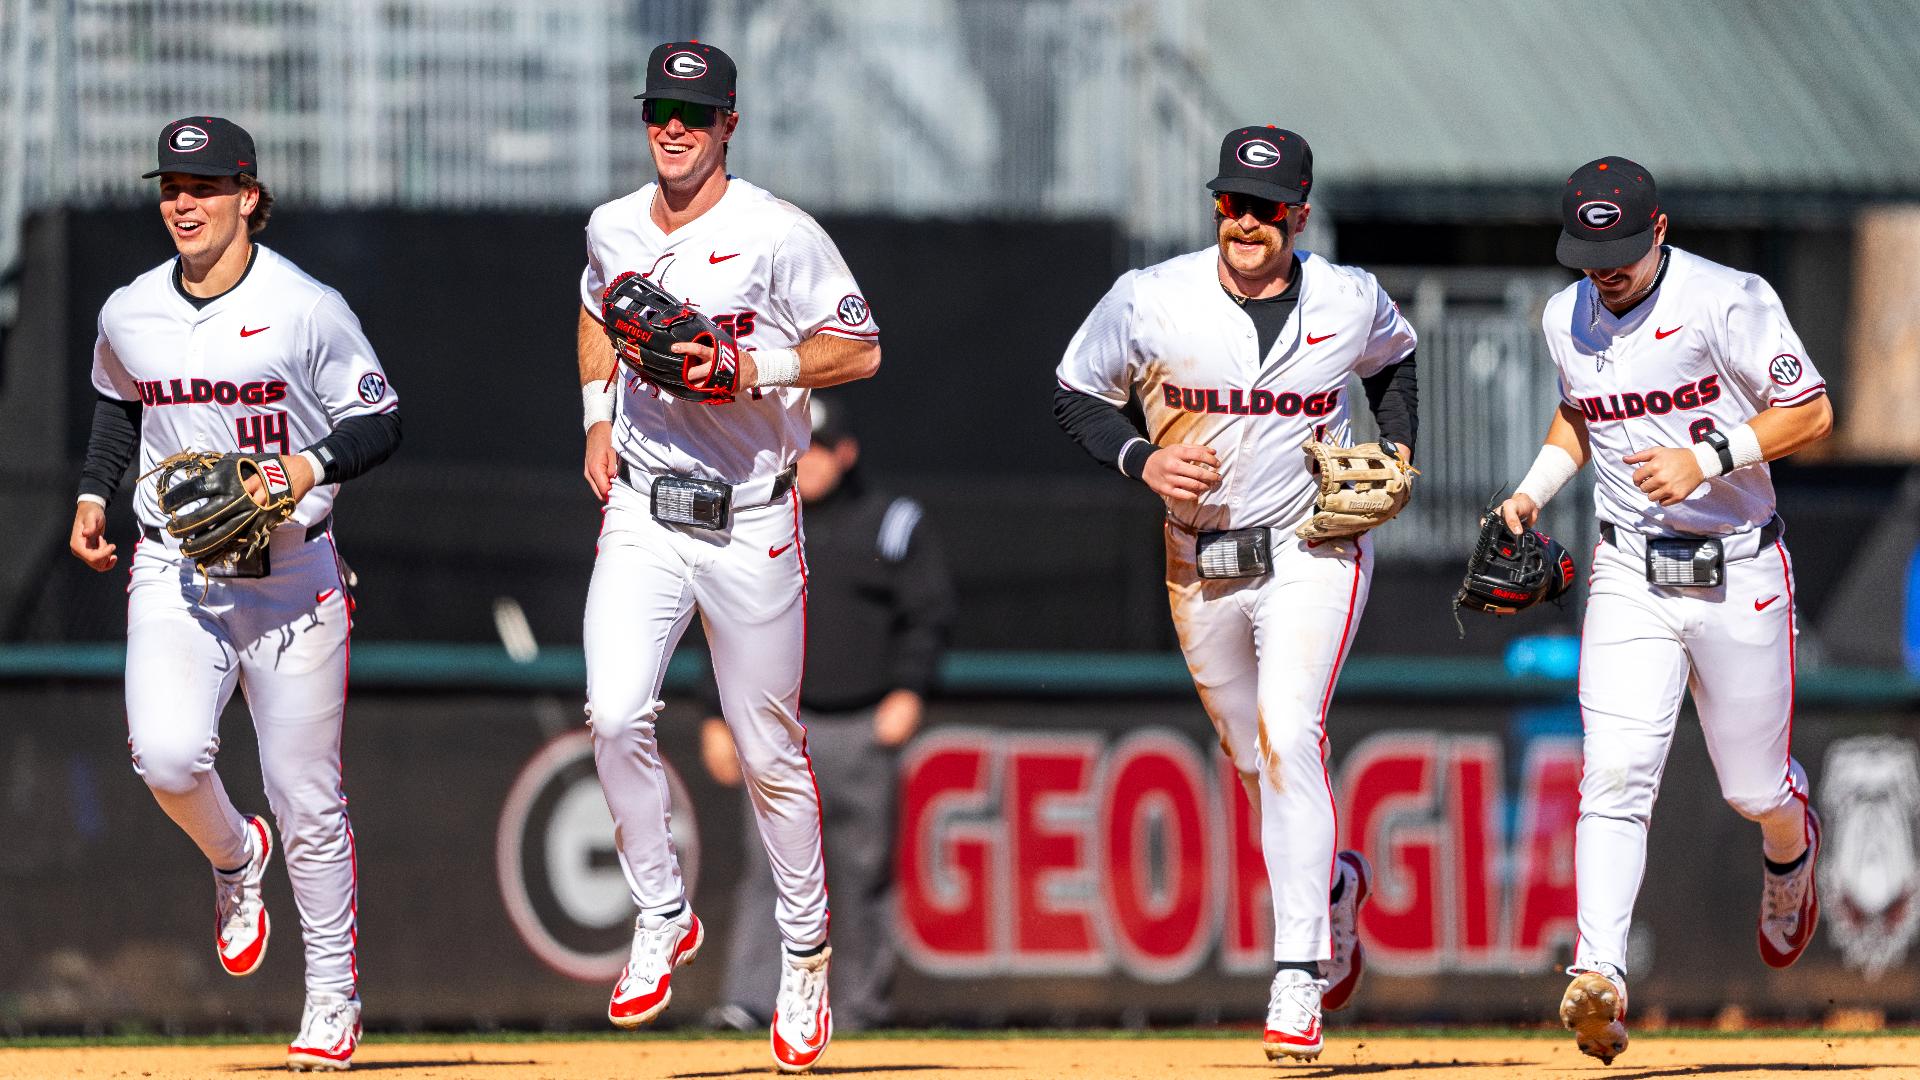 Georgia had a very successful season under first-year head coach Wes Johnson but ultimately came up short in a Super Regional loss at home to North Carolina State.